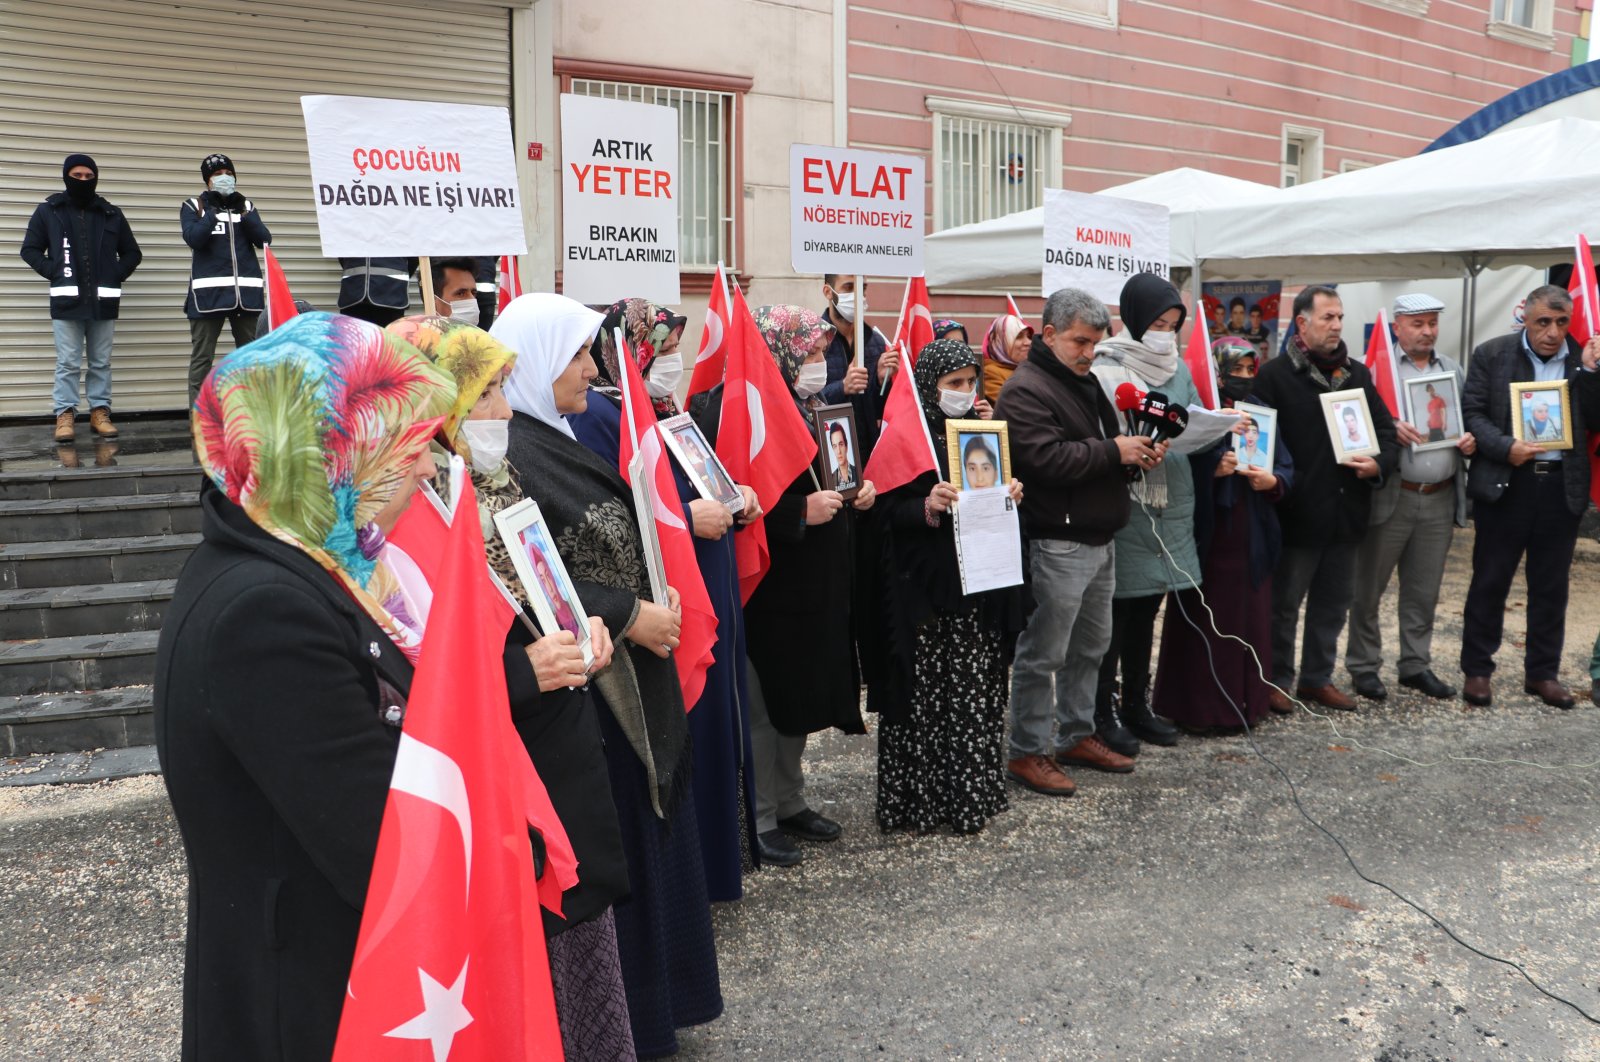 Families in Diyarbakır continue to protest the abduction of their children, some with disabilities, by the PKK, Diyarbakır province, Turkey, Jan. 25, 2022 (AA Photo)